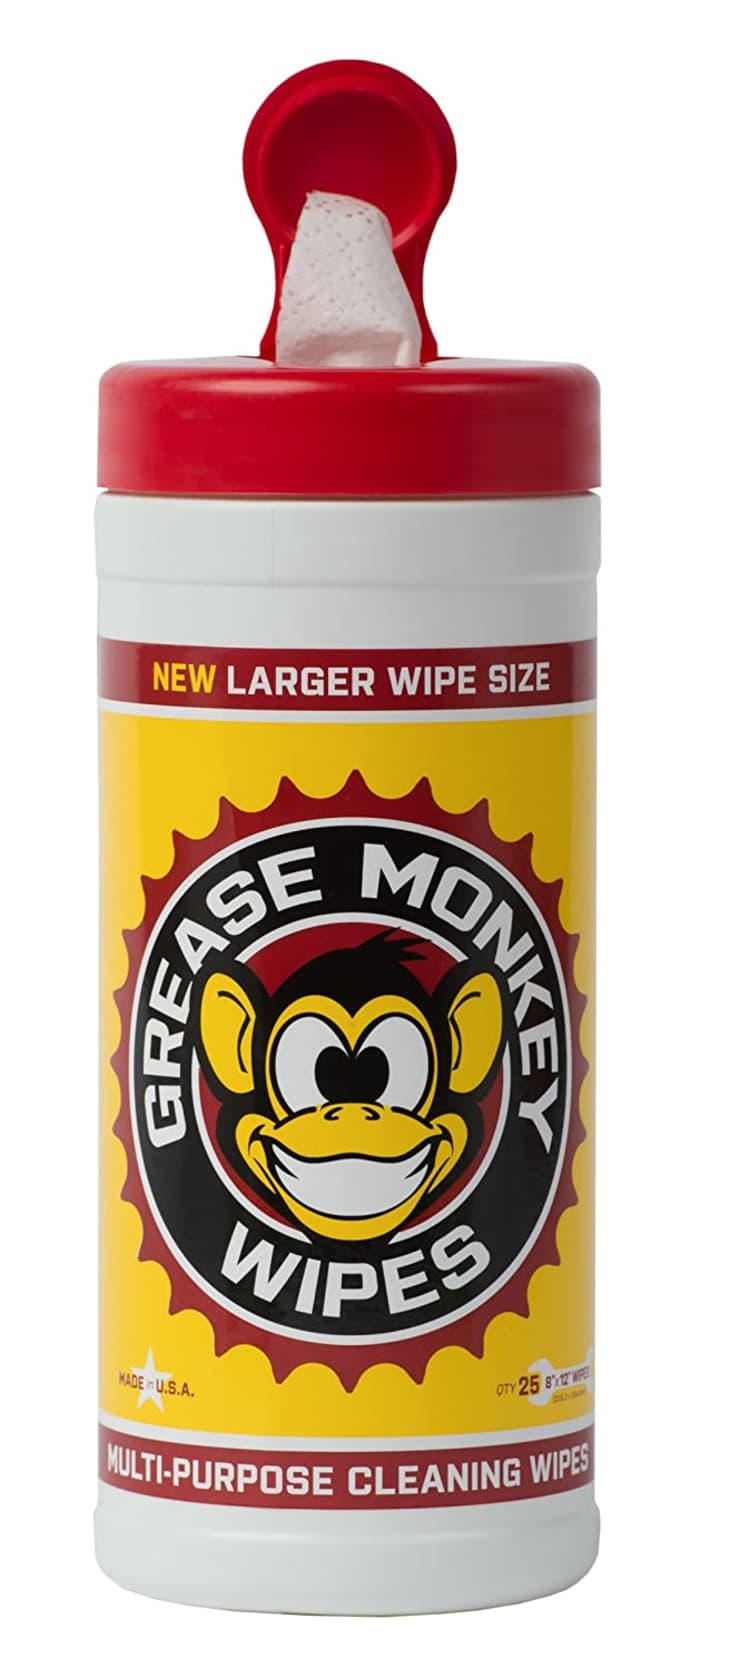 Grease Monkey Wipes Canister, 25-Count at Amazon